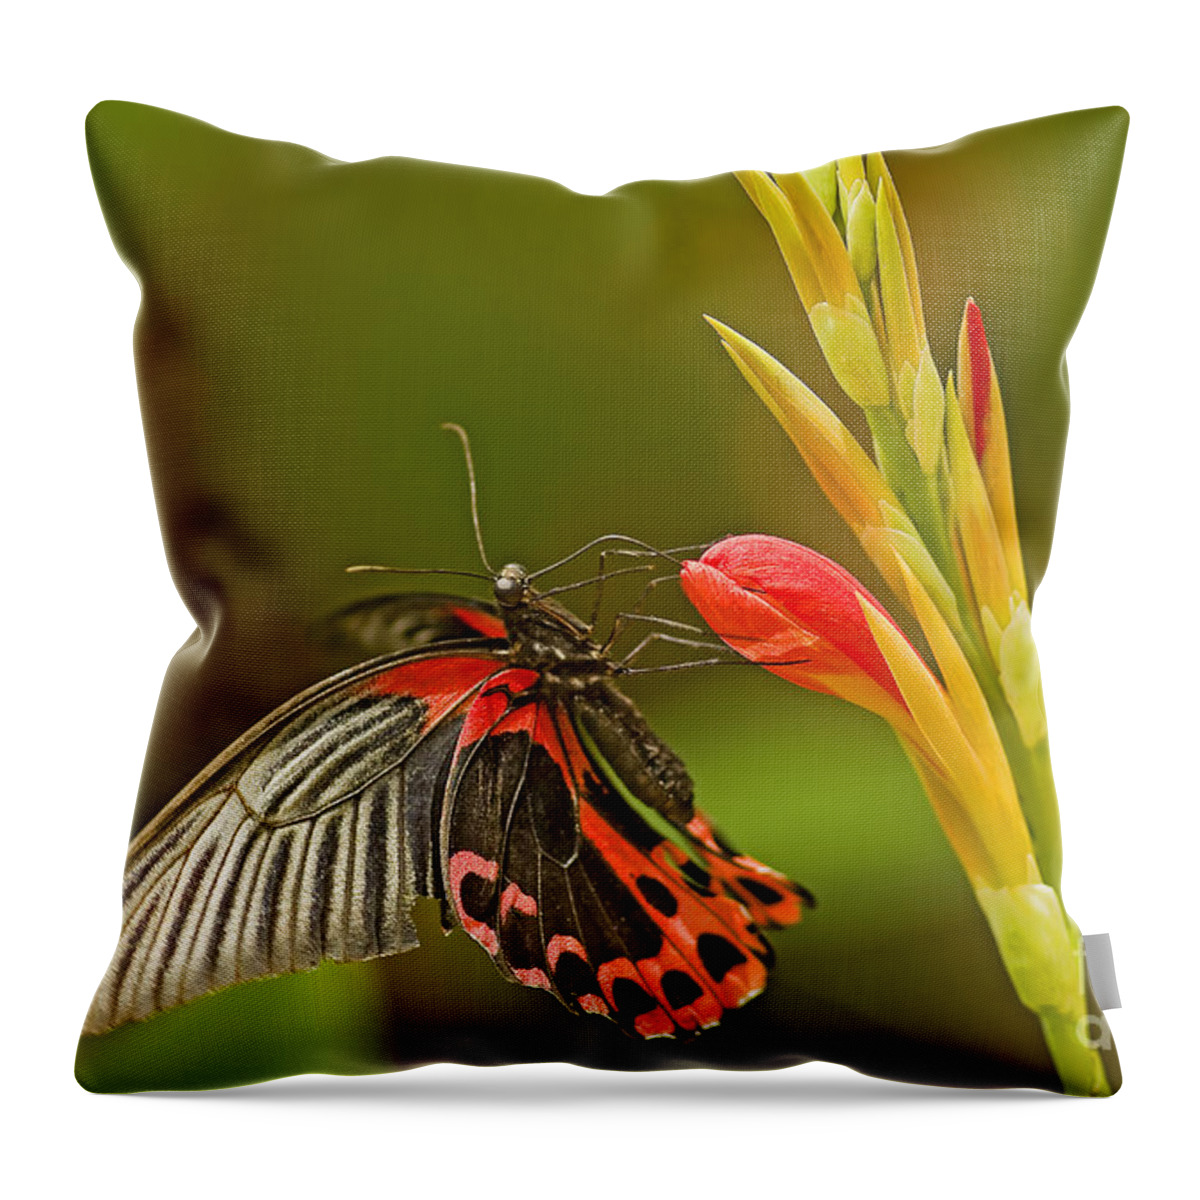 Angle Throw Pillow featuring the photograph Silver Spotted Flambeau by Nick Boren